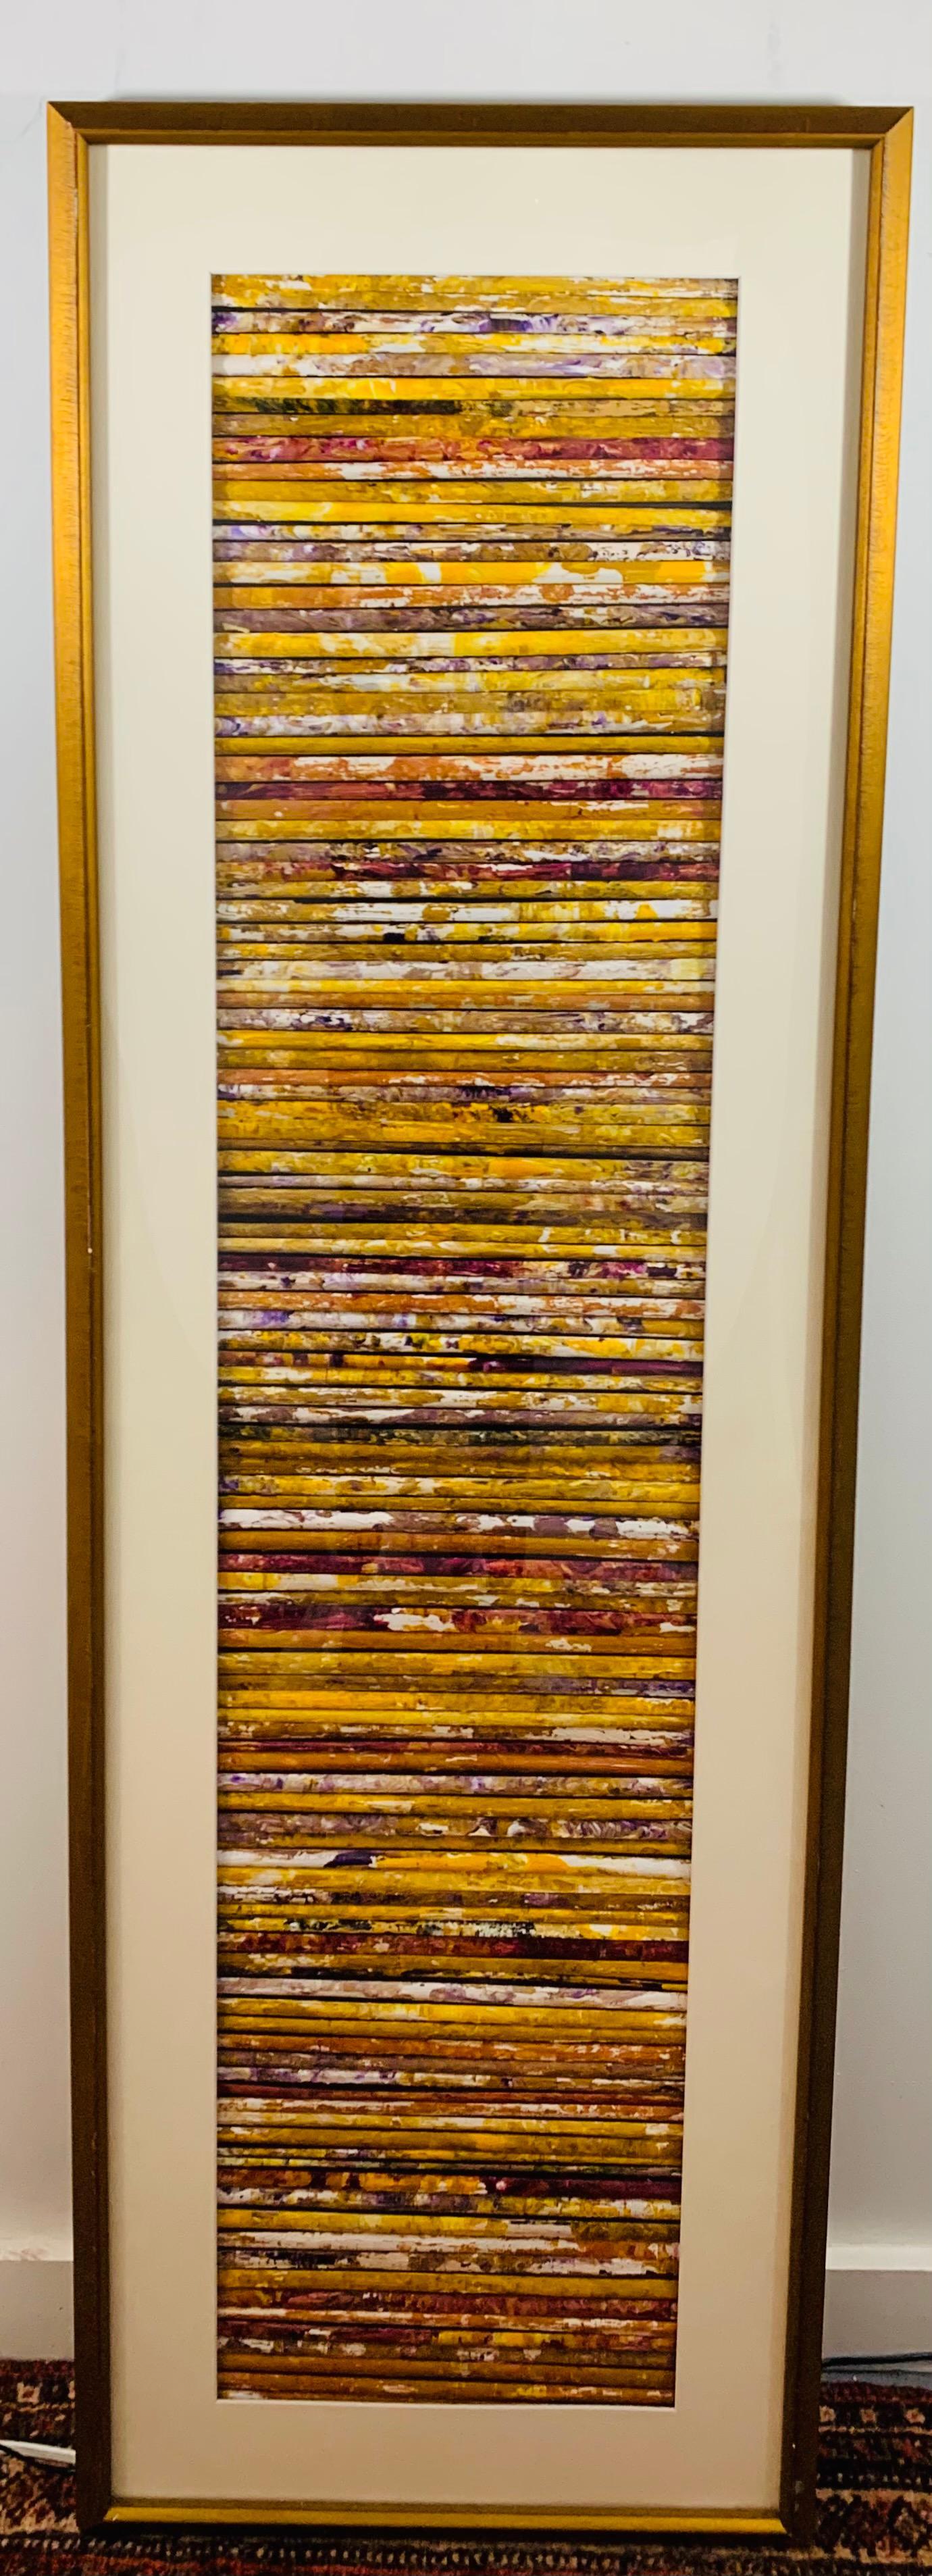 This nature inspired modern horizontal wall art piece is made of reeds that are glued into a wood frame that is hidden by the mat in the final framing. Created by Cheryl & Steven Ward, this modern piece will add color and a nature touch to any wall